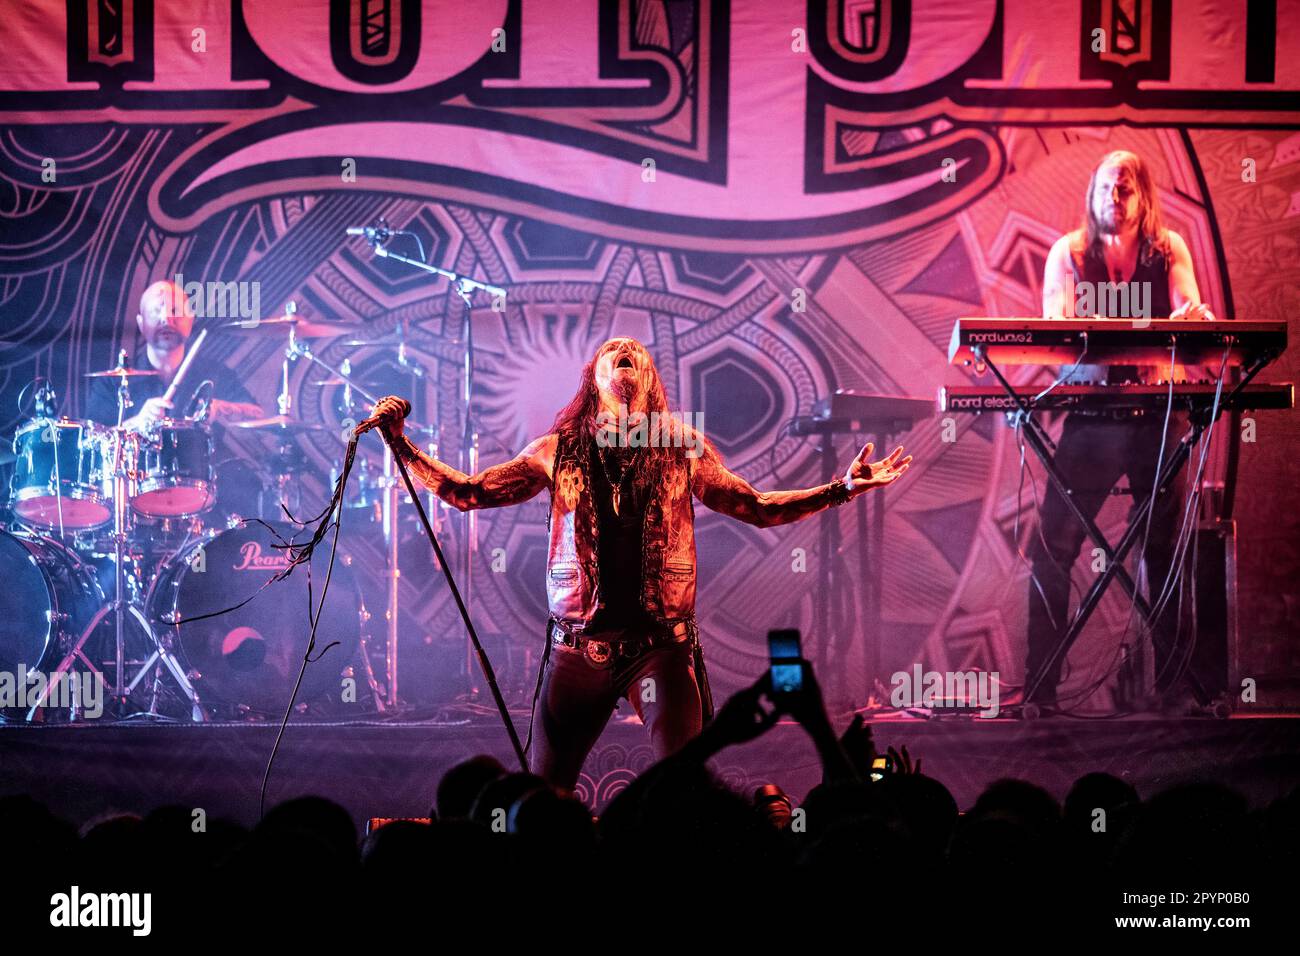 Oslo, Norway. 07th, April 2023. The Finnish heavy metal band Amorphis performs a live concert at Rockefeller during the Norwegian metal festival Inferno Metal Festival 2023 in Oslo. Here vocalist Tomi Joutsen is seen live on stage. (Photo credit: Gonzales Photo - Terje Dokken). Stock Photo